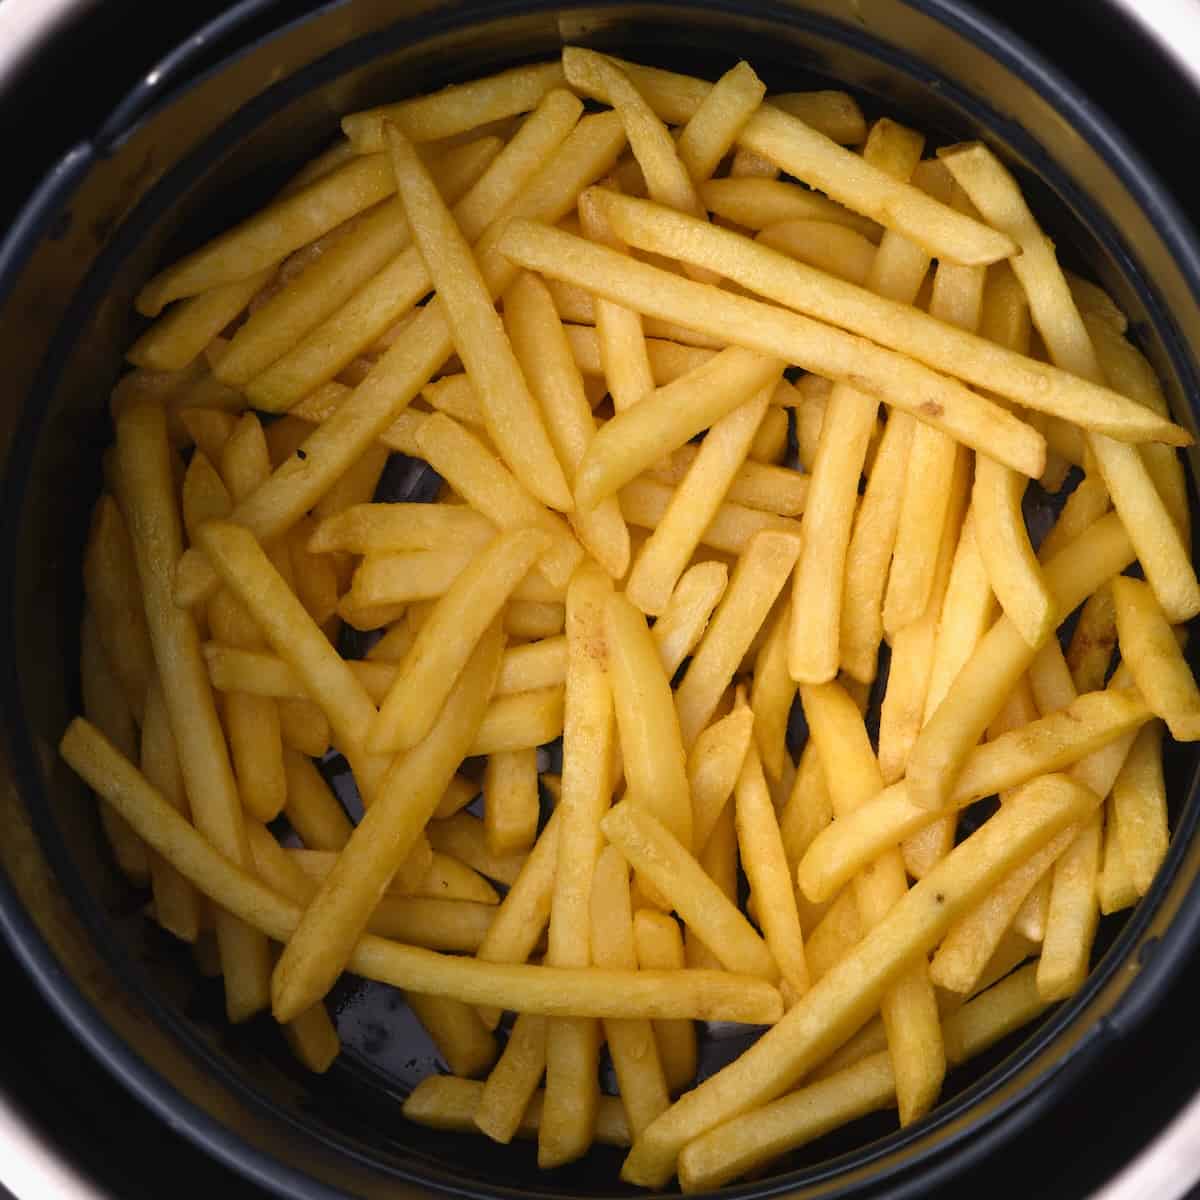 Reheating French fries in an air fryer